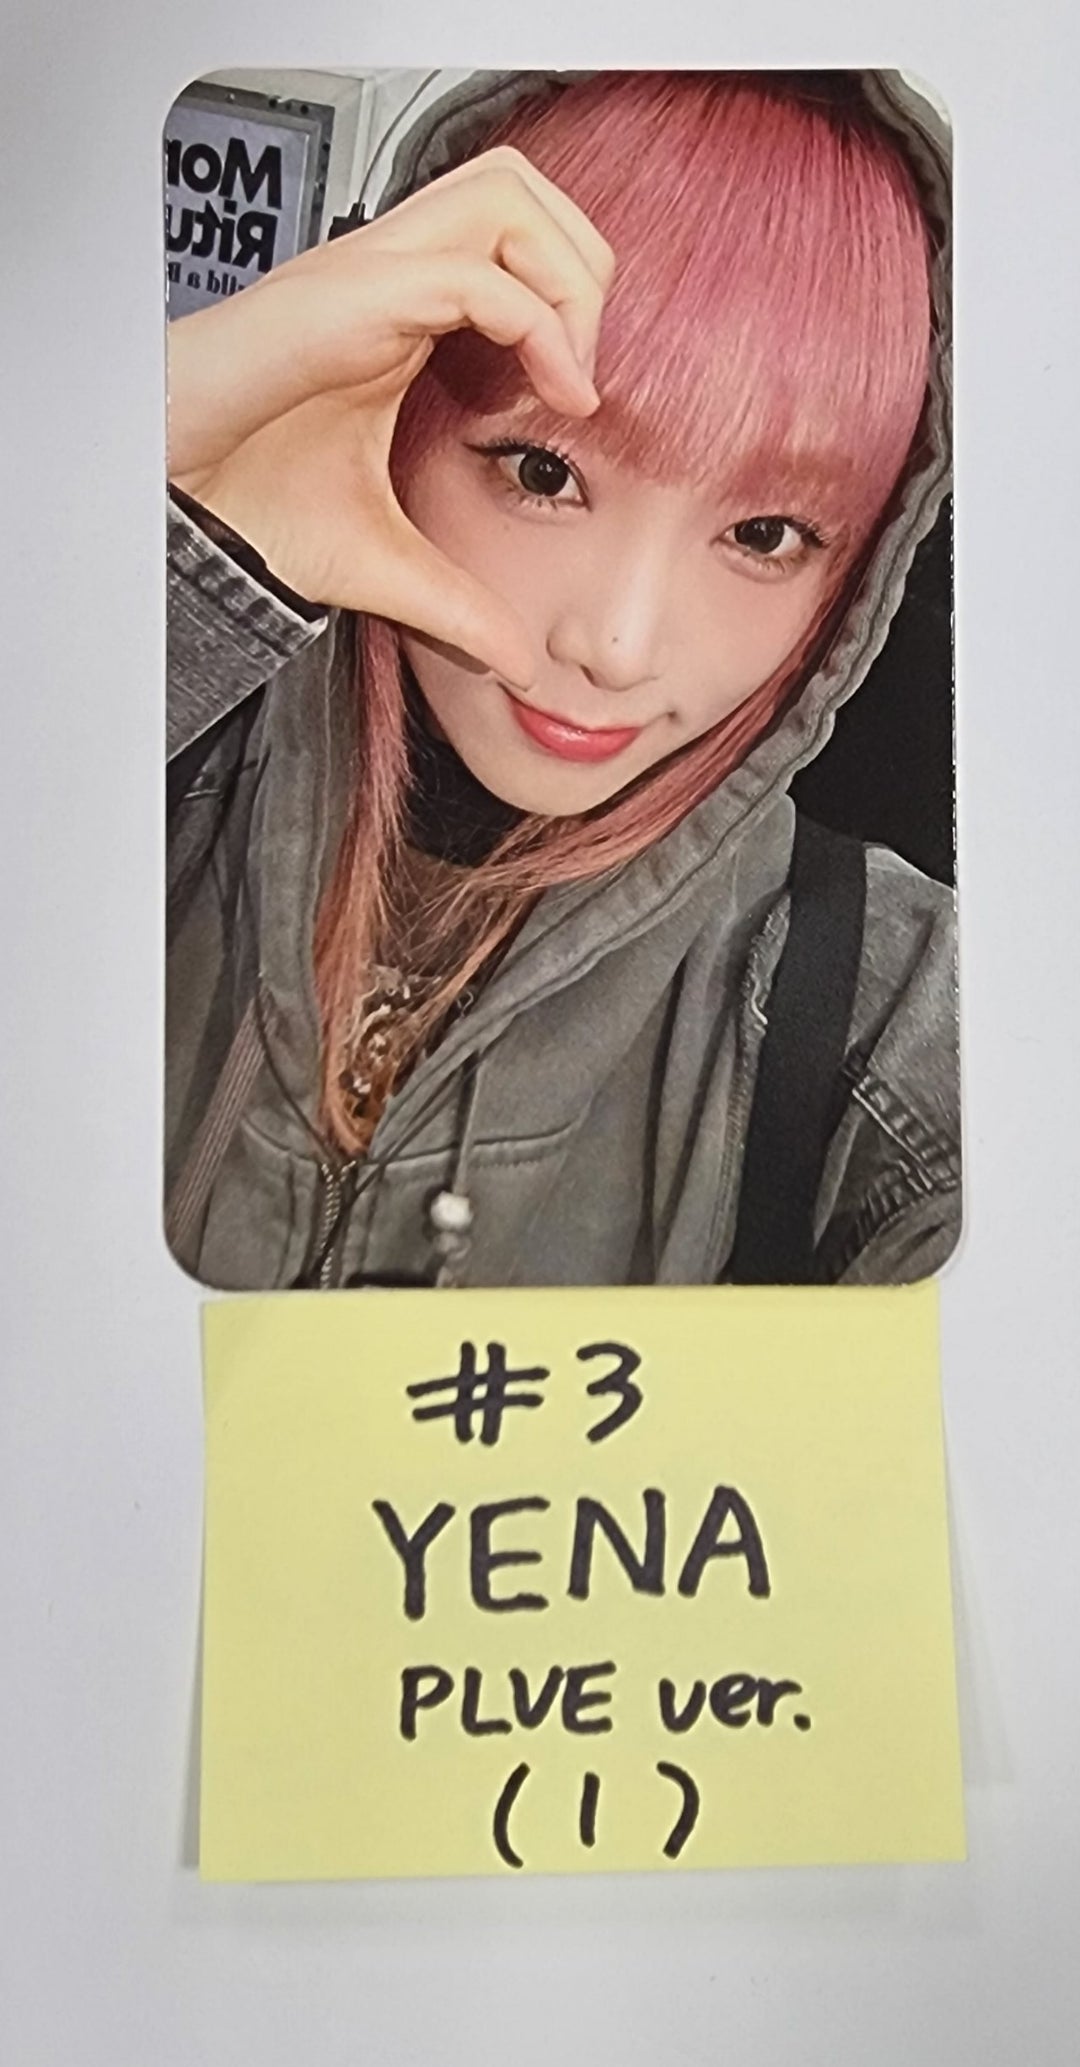 YENA "Good Morning" - Official Photocards [PLVE ver.] [24.1.16]